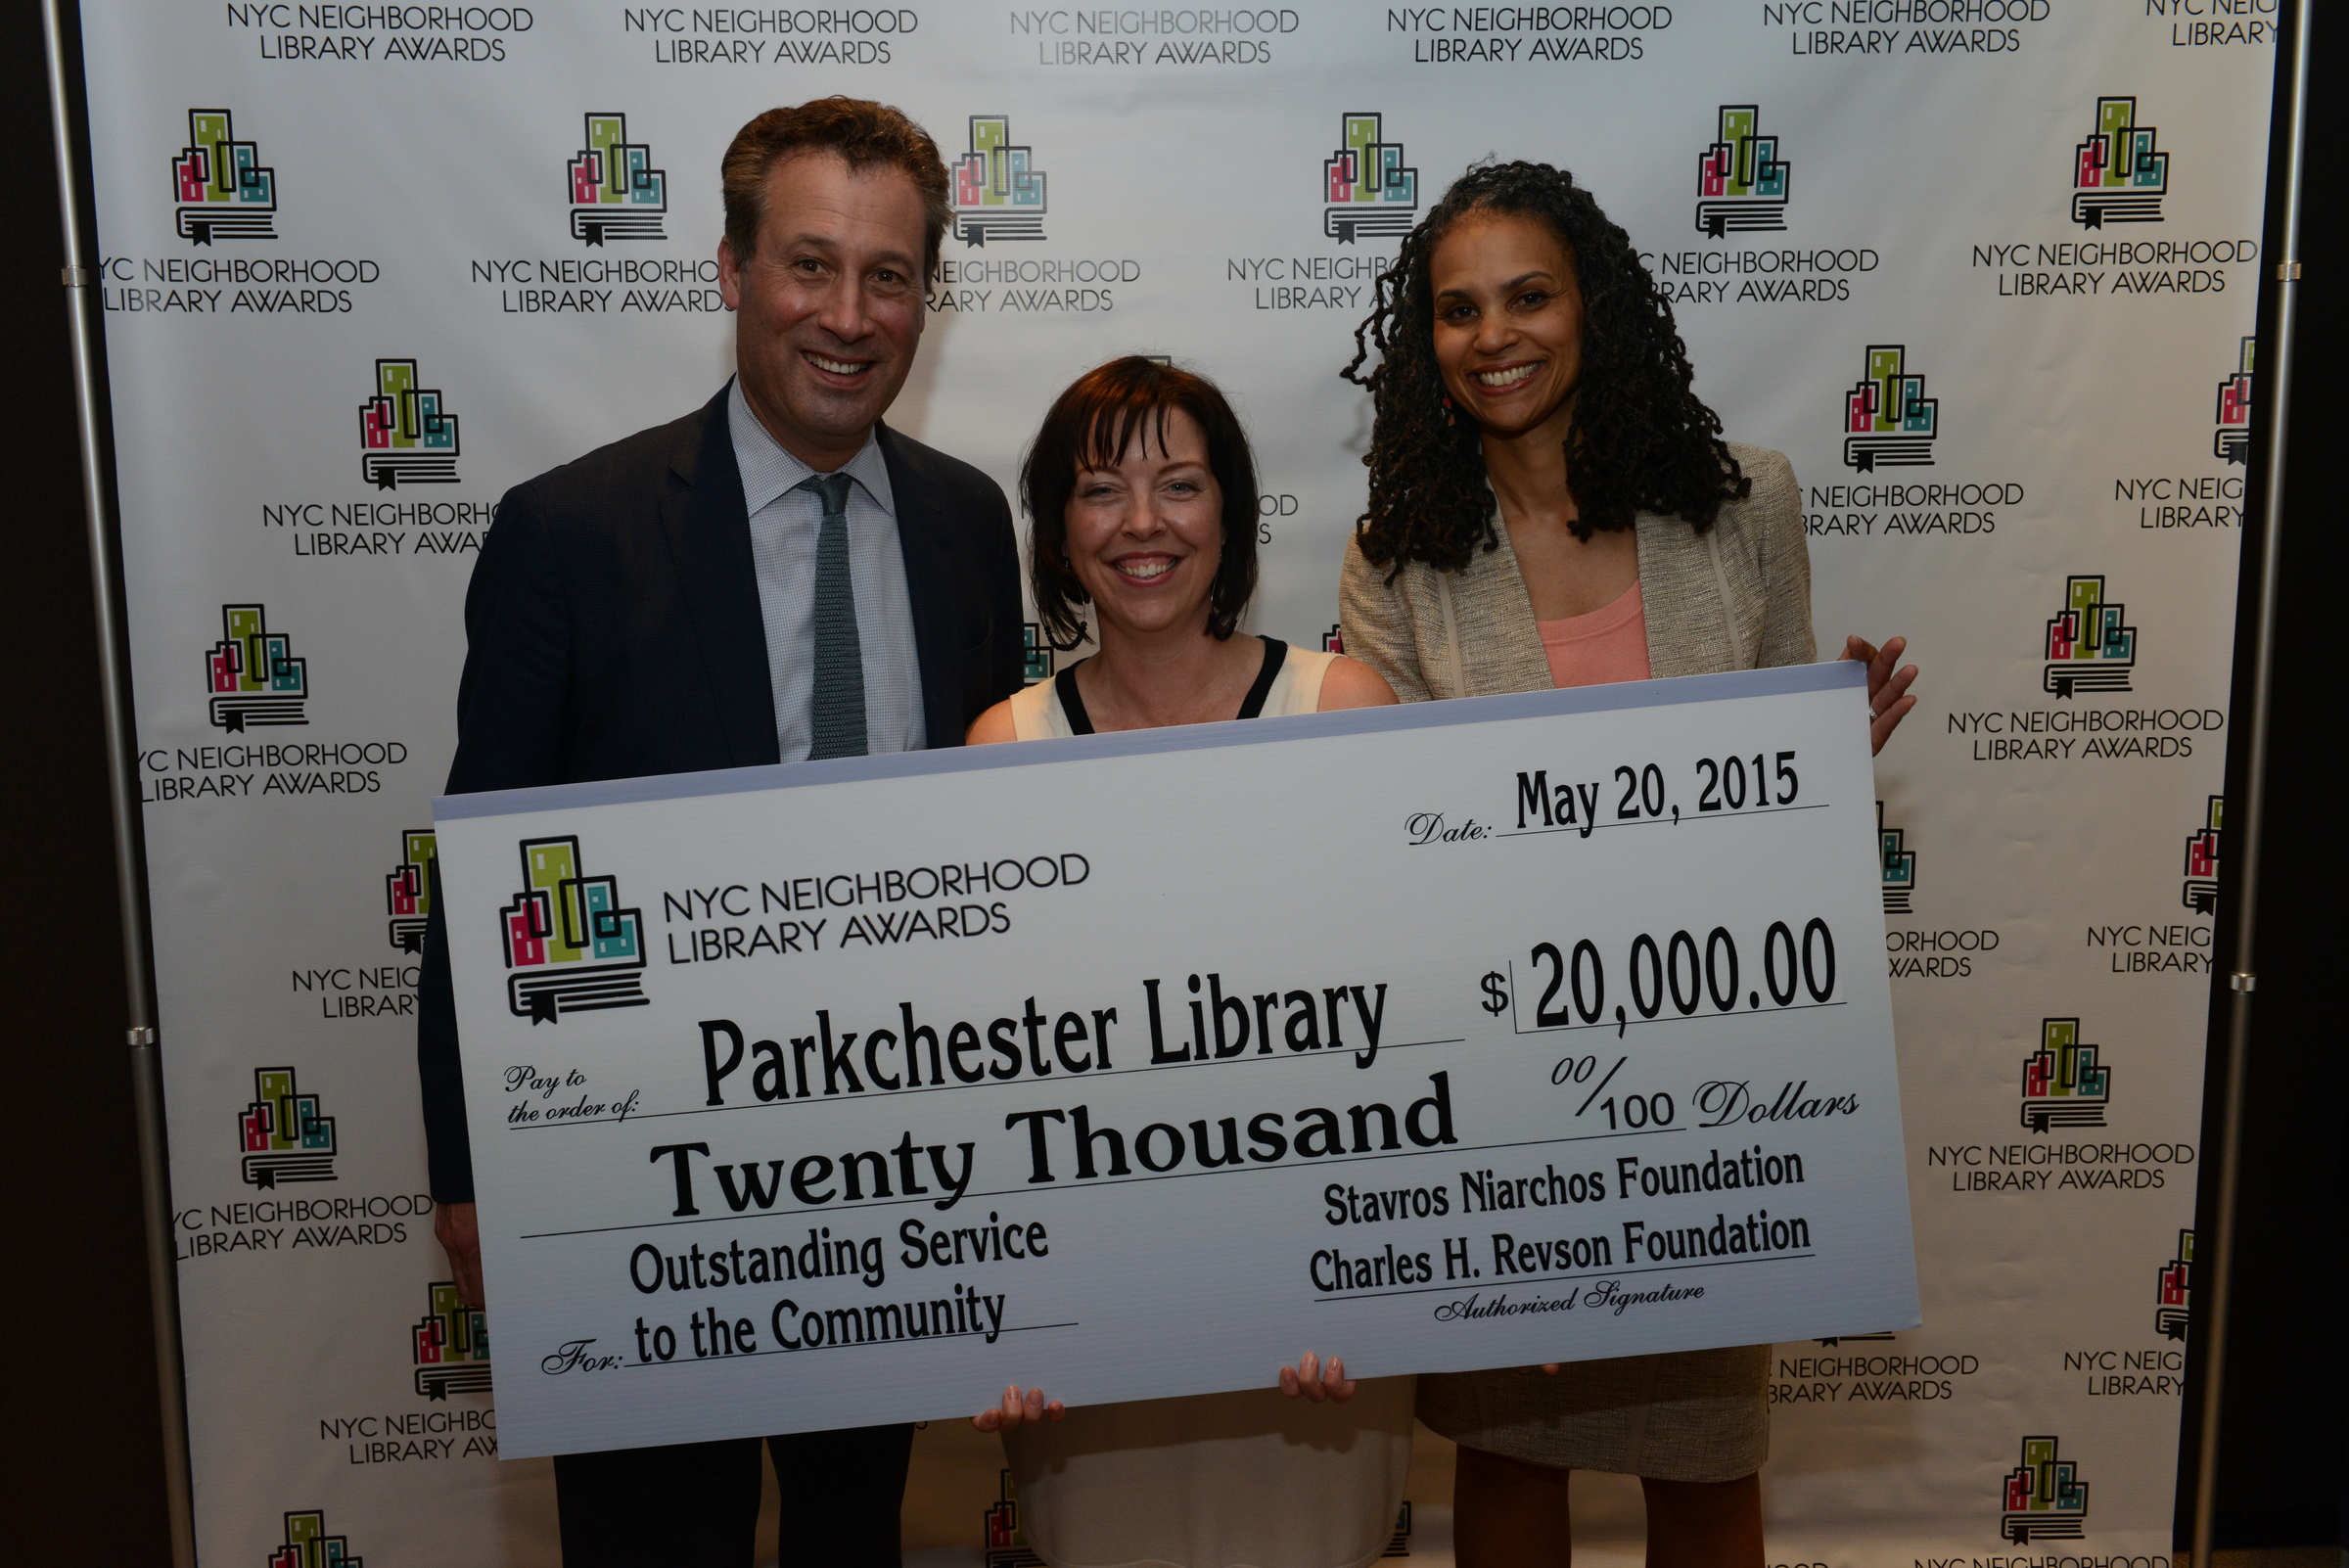 L to R: NYPL President Tony Marx, Parkchester Library Manager Wendy Archer, and Library Awards Judge Maya Wiley